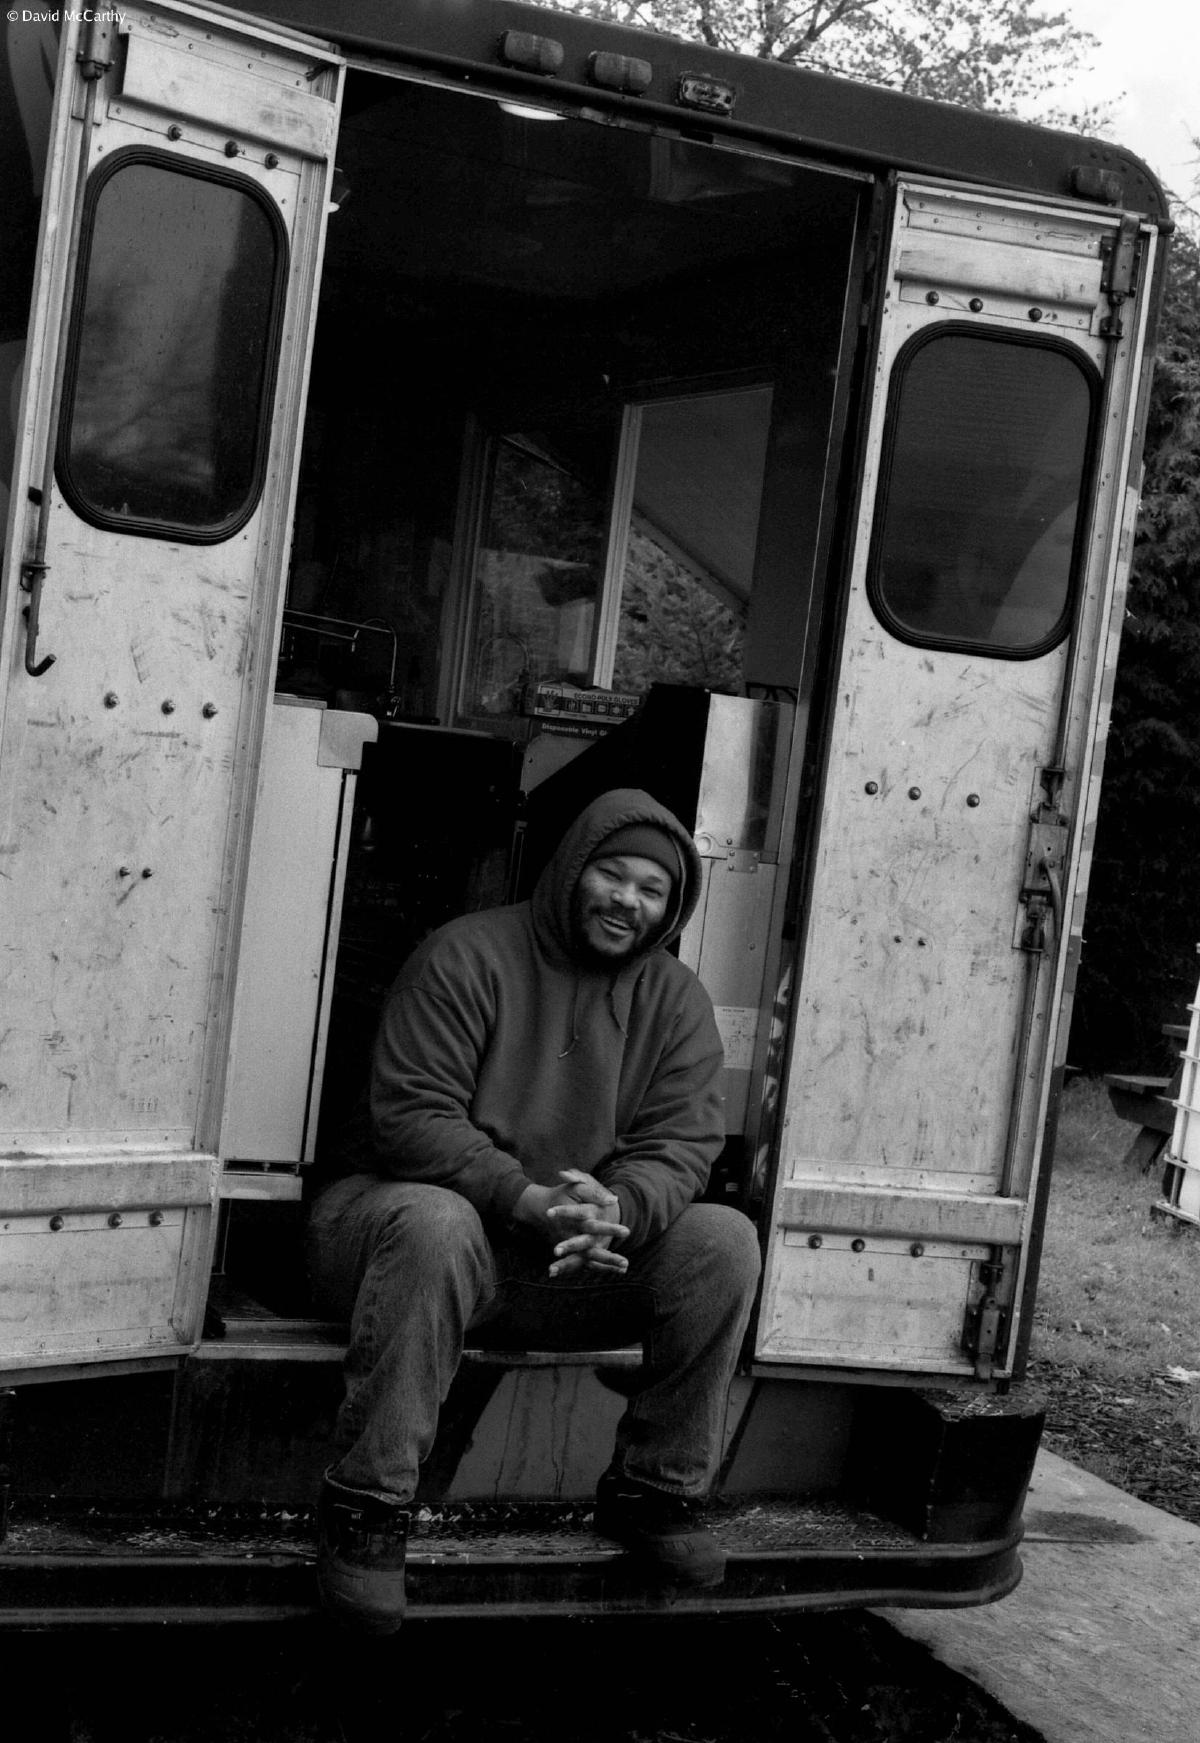 Black and white photograph of a smiling man in a hooded sweatshirt sitting in the back of a panel truck.